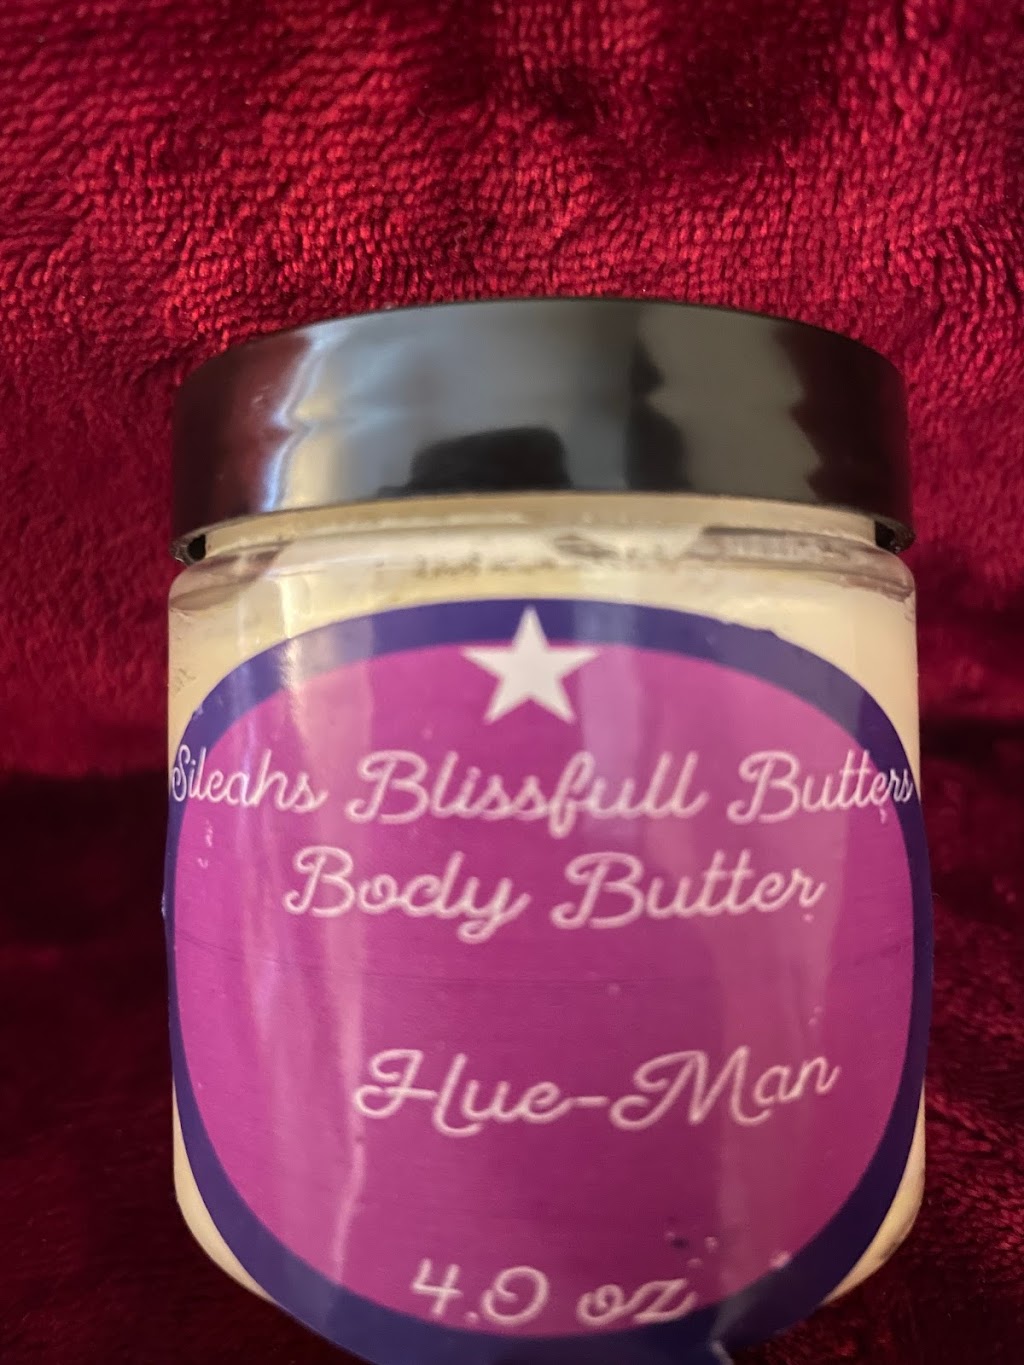 (SBB) Sileahs Blissfull Butters LLc. | 147 Norway Ave, Staten Island, NY 10305 | Phone: (347) 238-0763